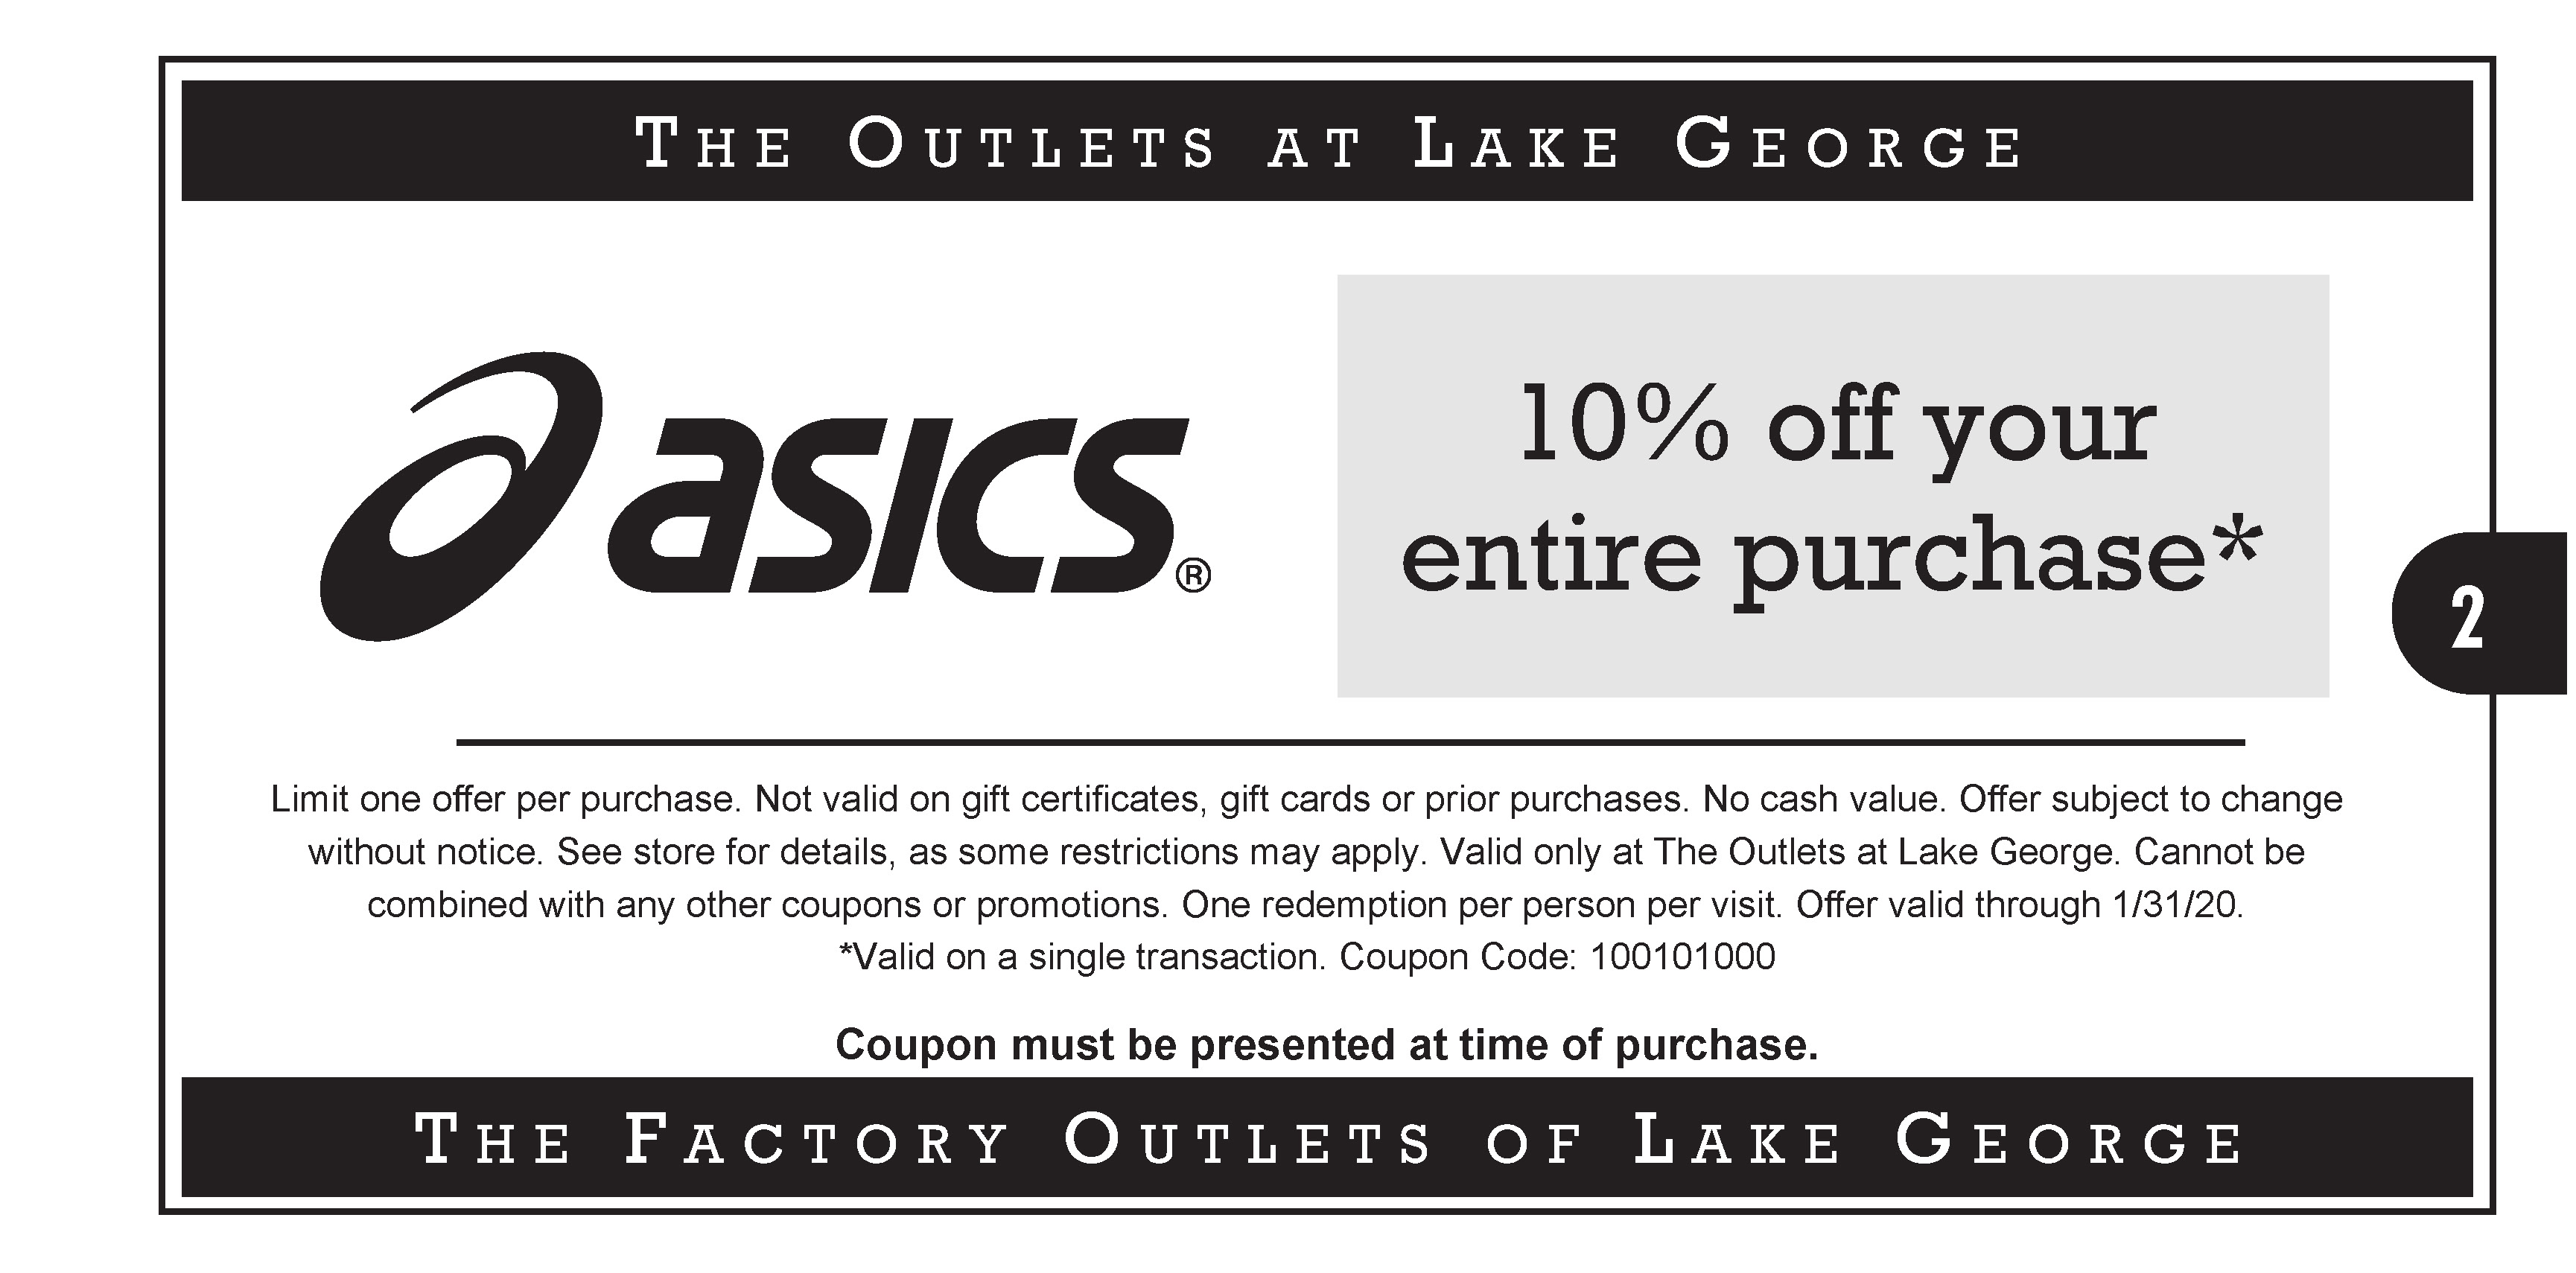 asics outlet discount